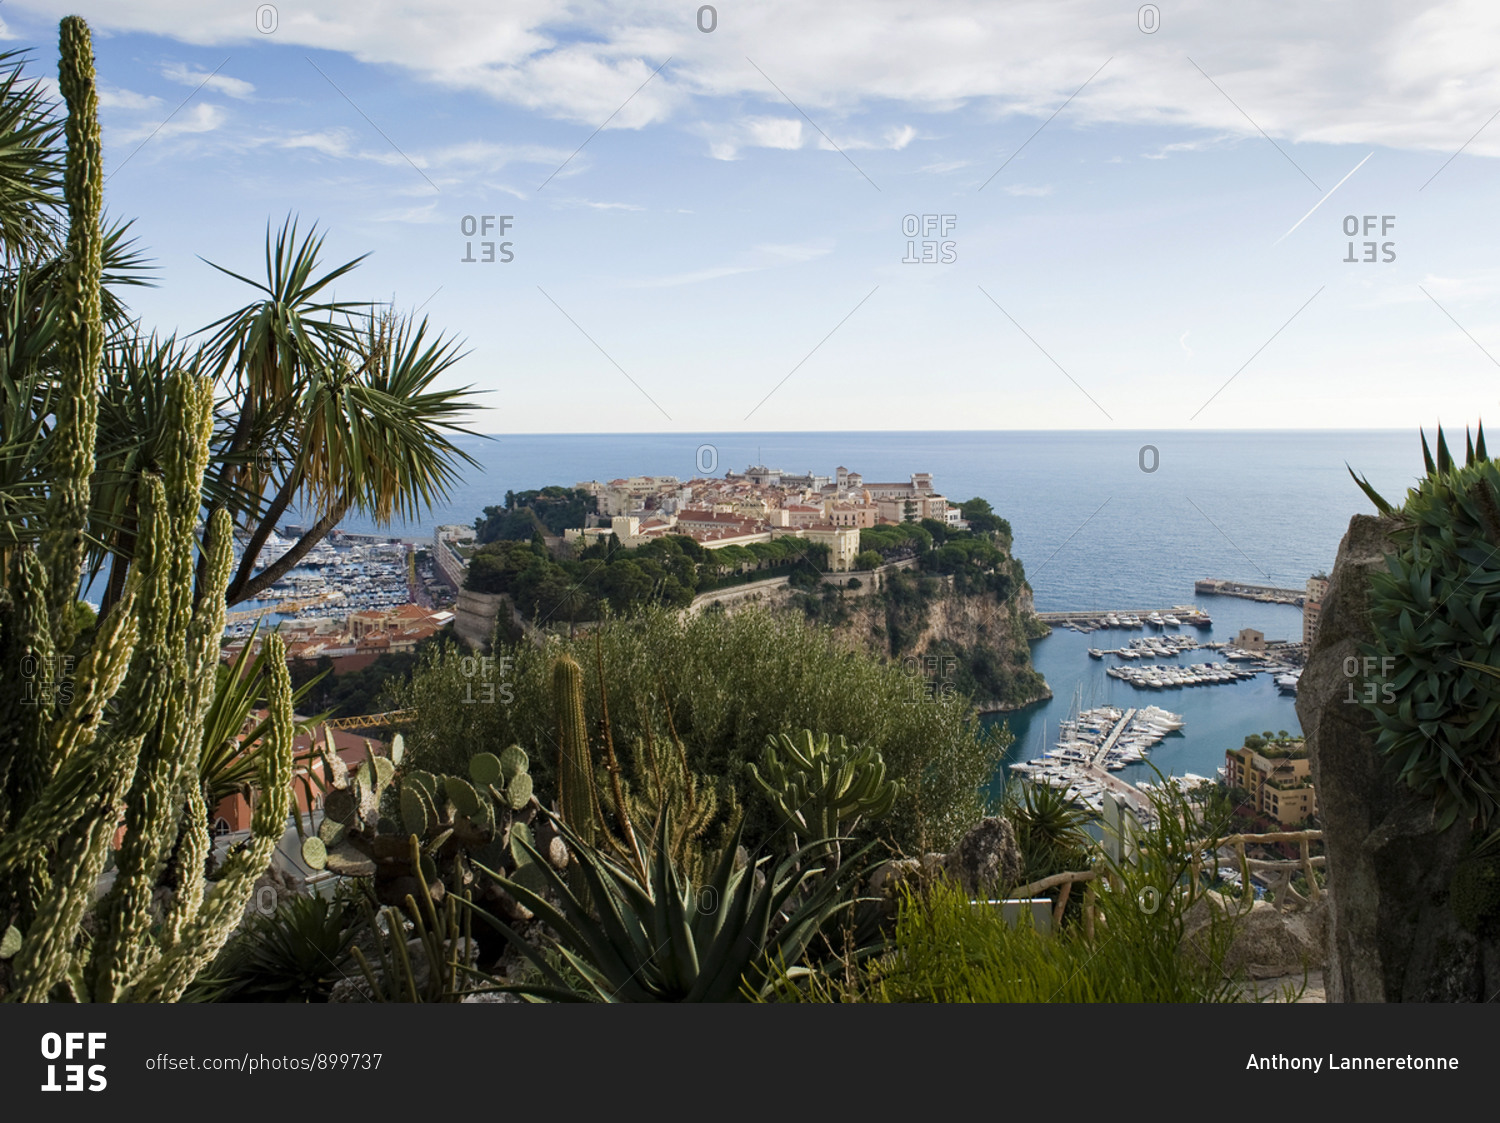 Panoramic view of Monaco Rocher with Grimaldi Palace from an
exotic garden, Monaco stock photo - OFFSET